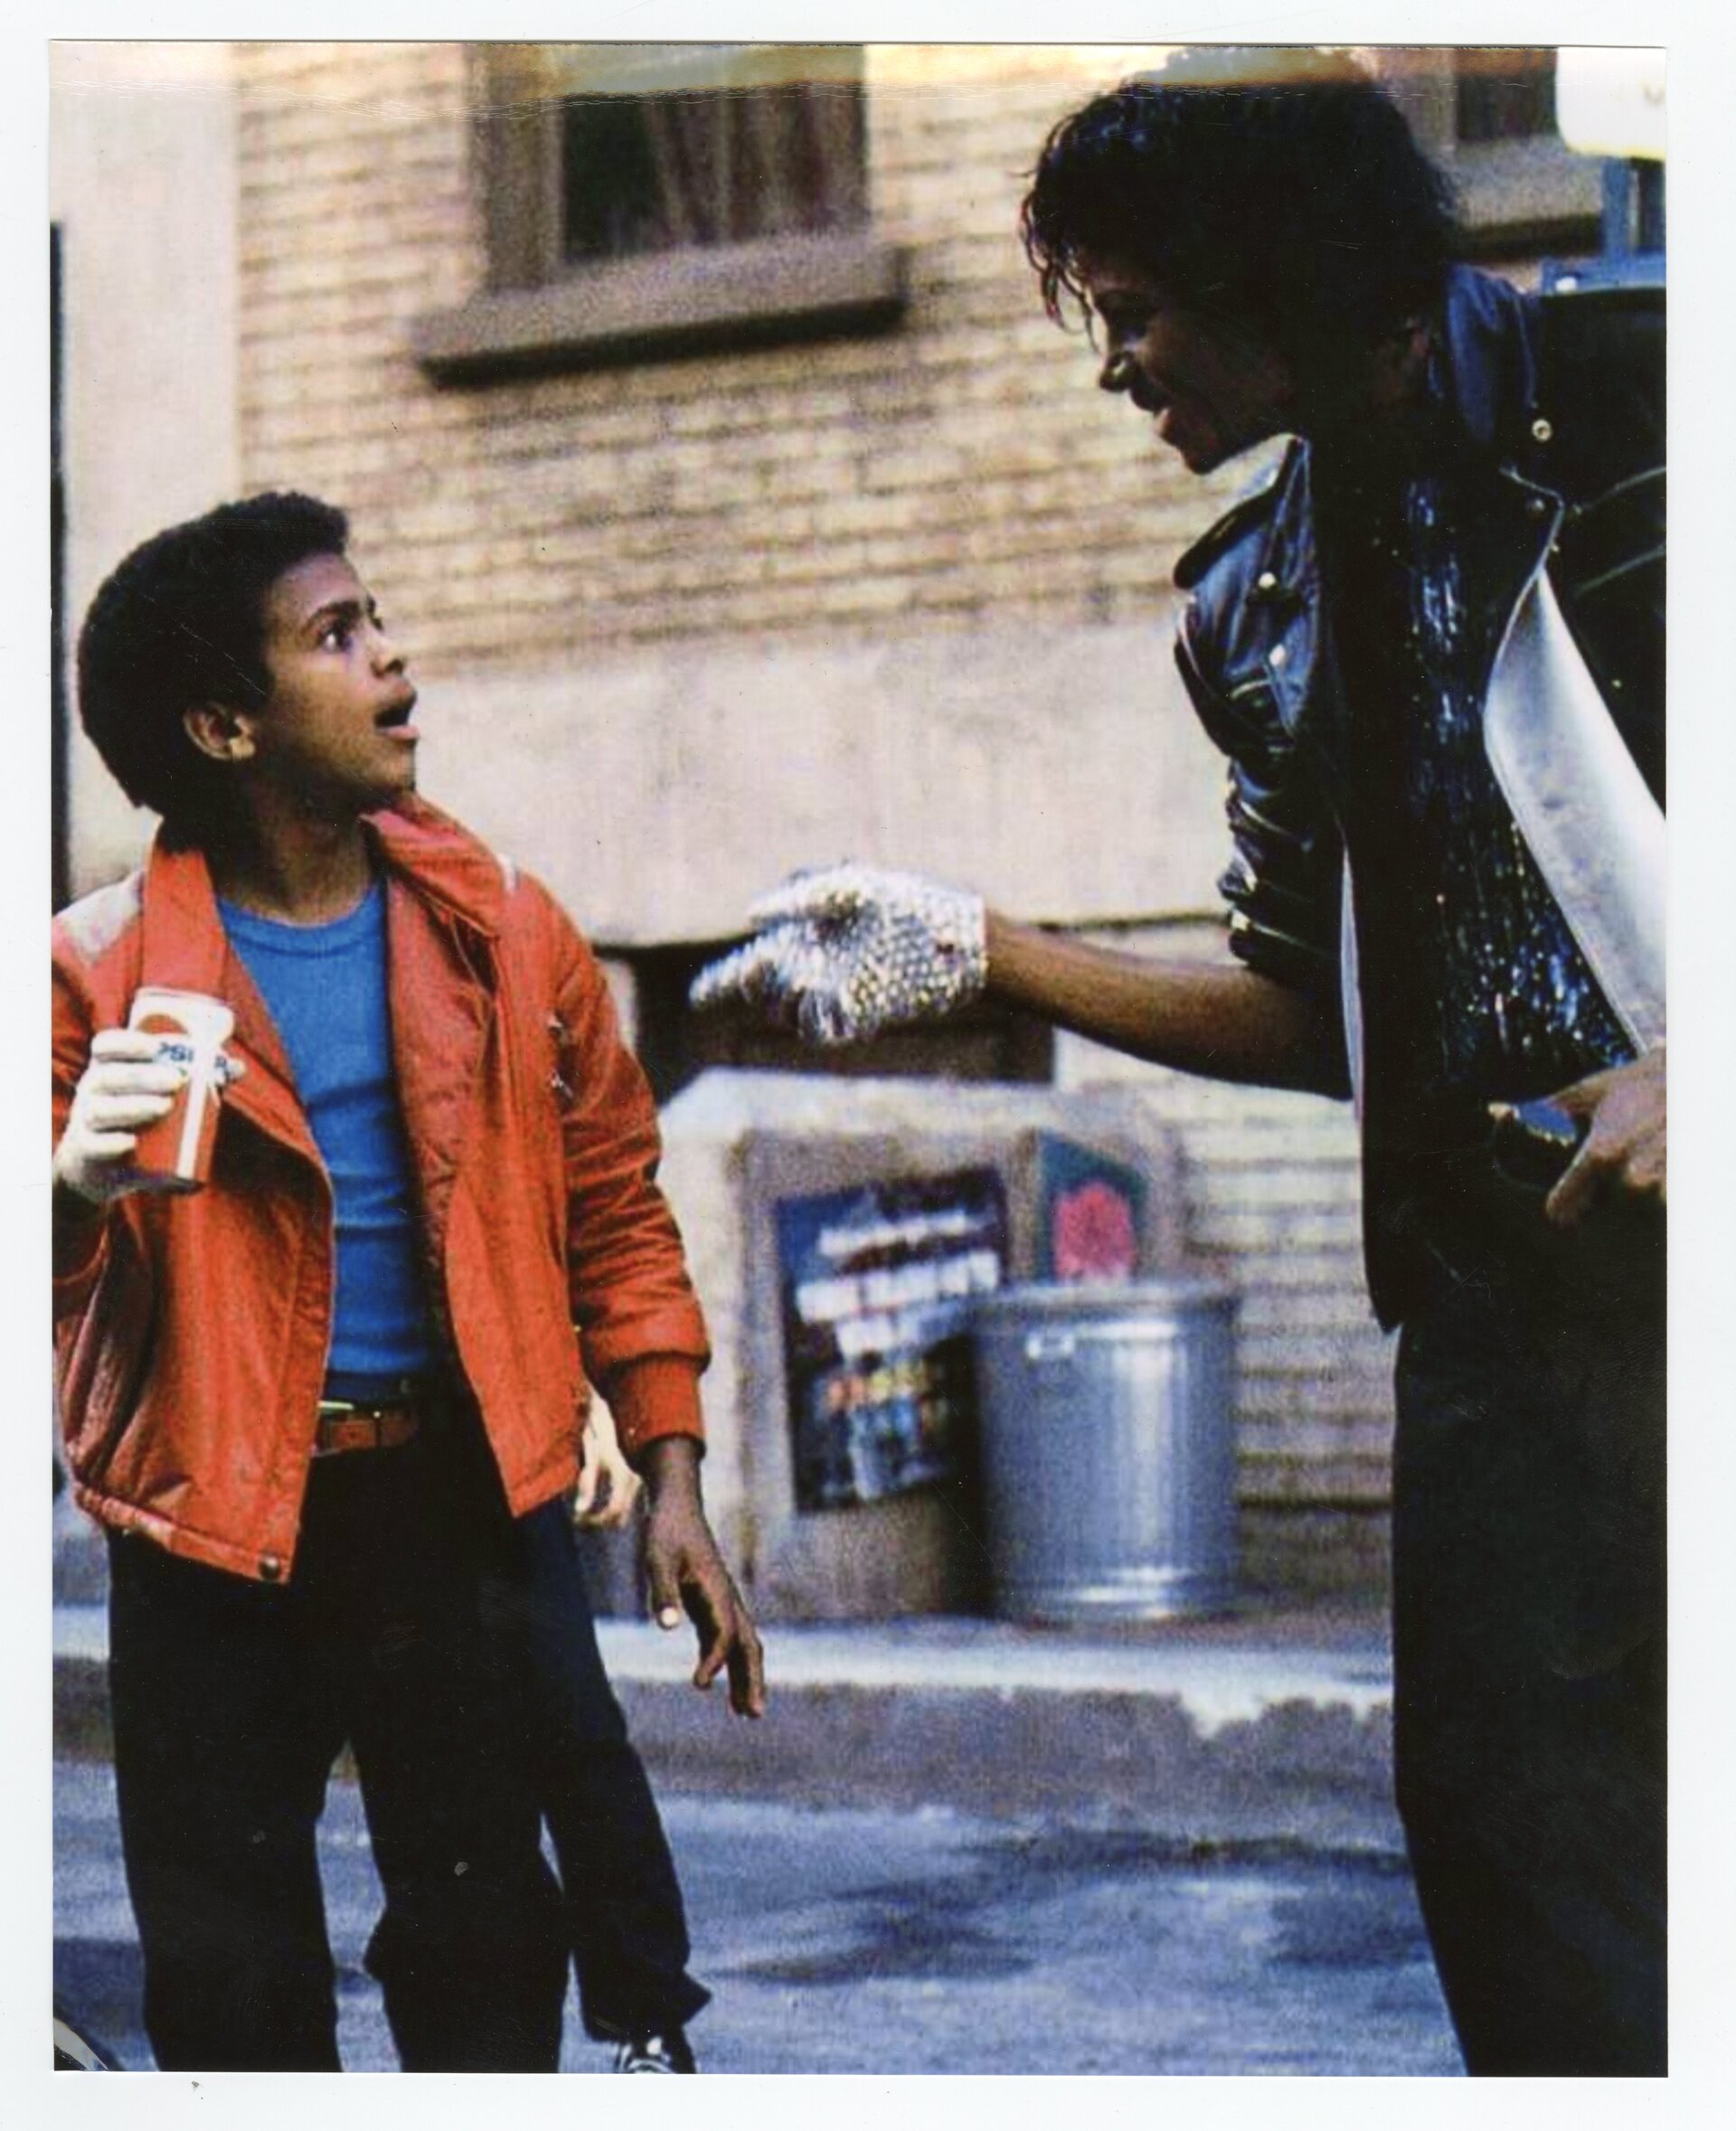 Michael Jackson in his first Pepsi commercial appearance